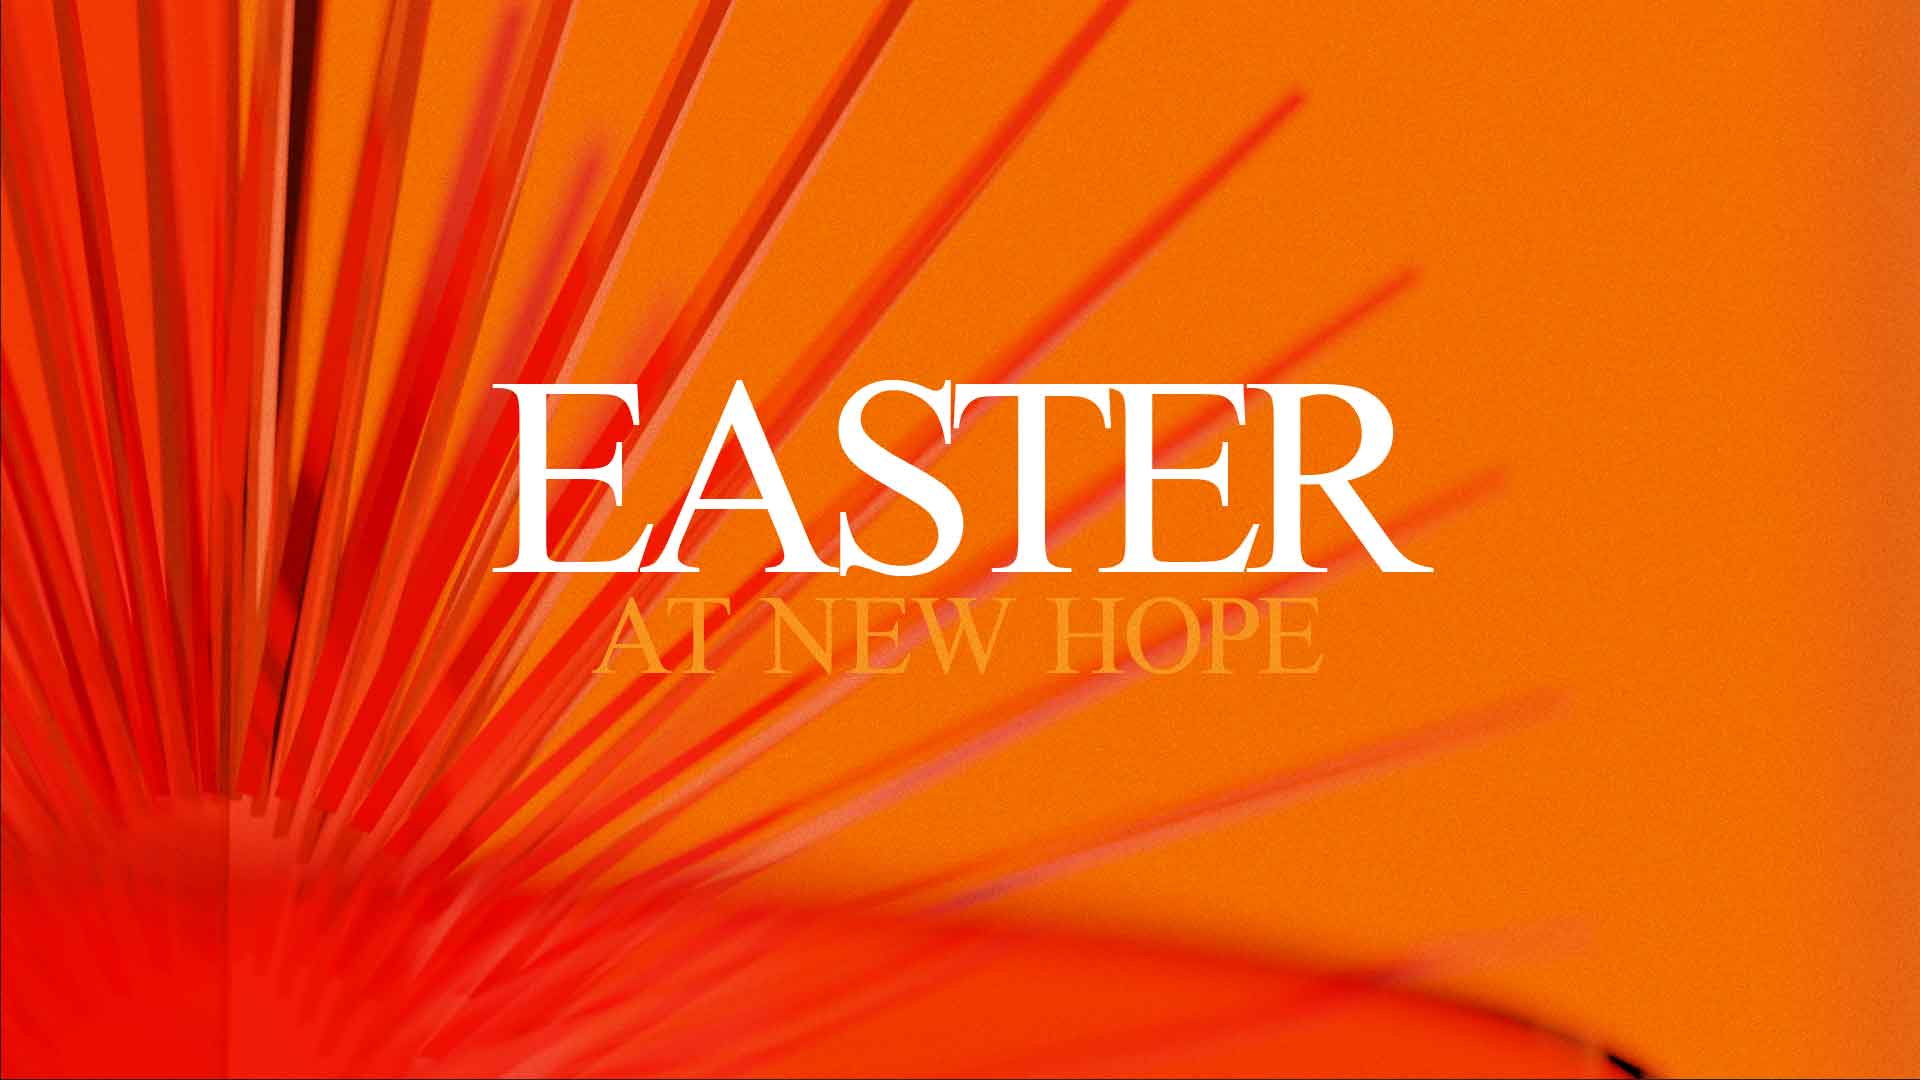 Easter at New Hope